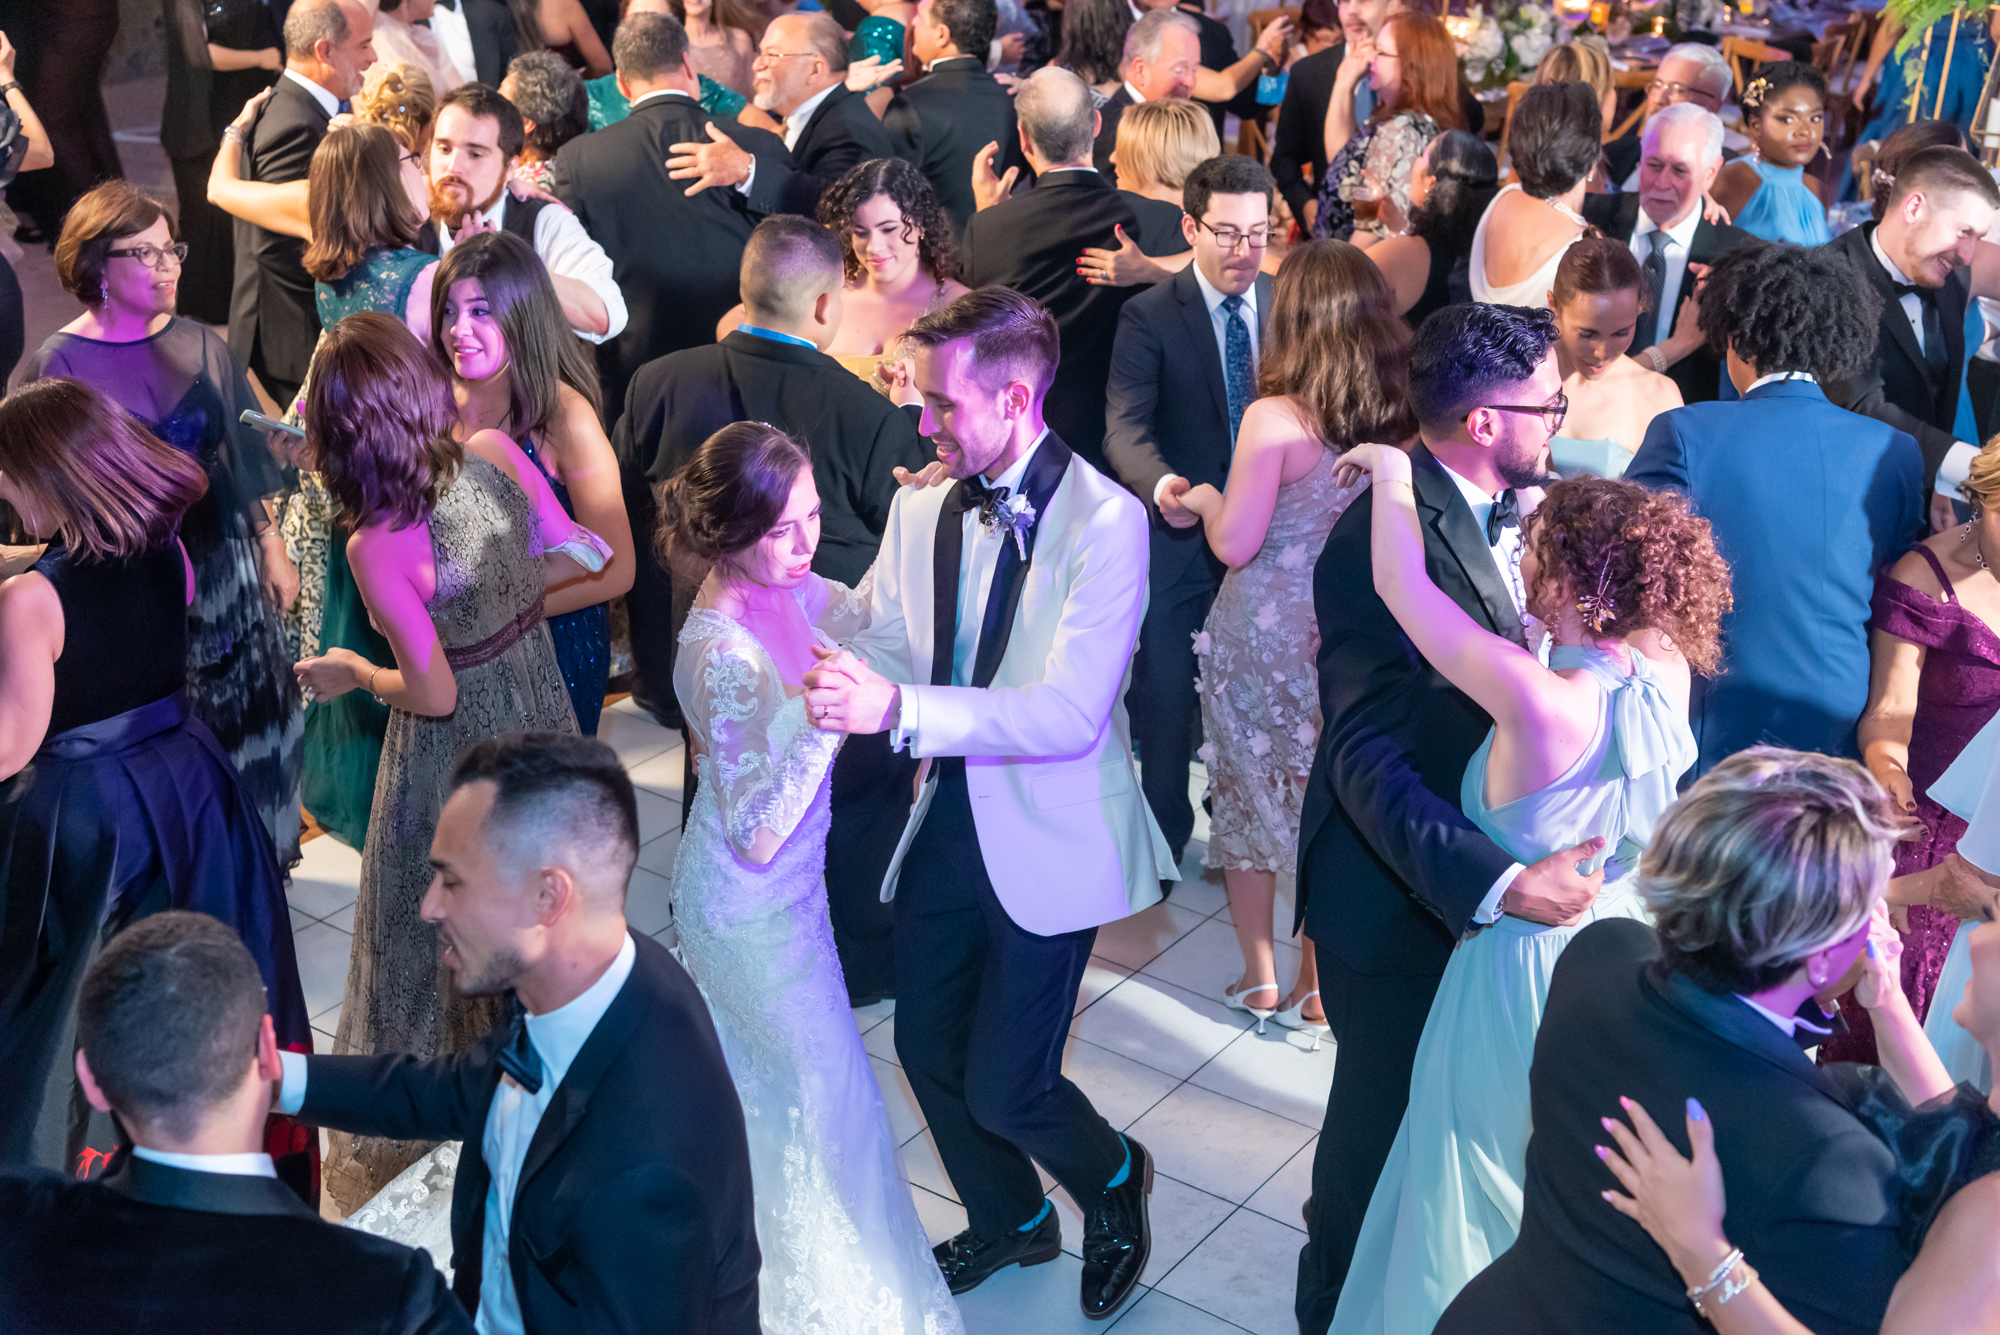 Newlyweds dancing, surrounded by friends and family